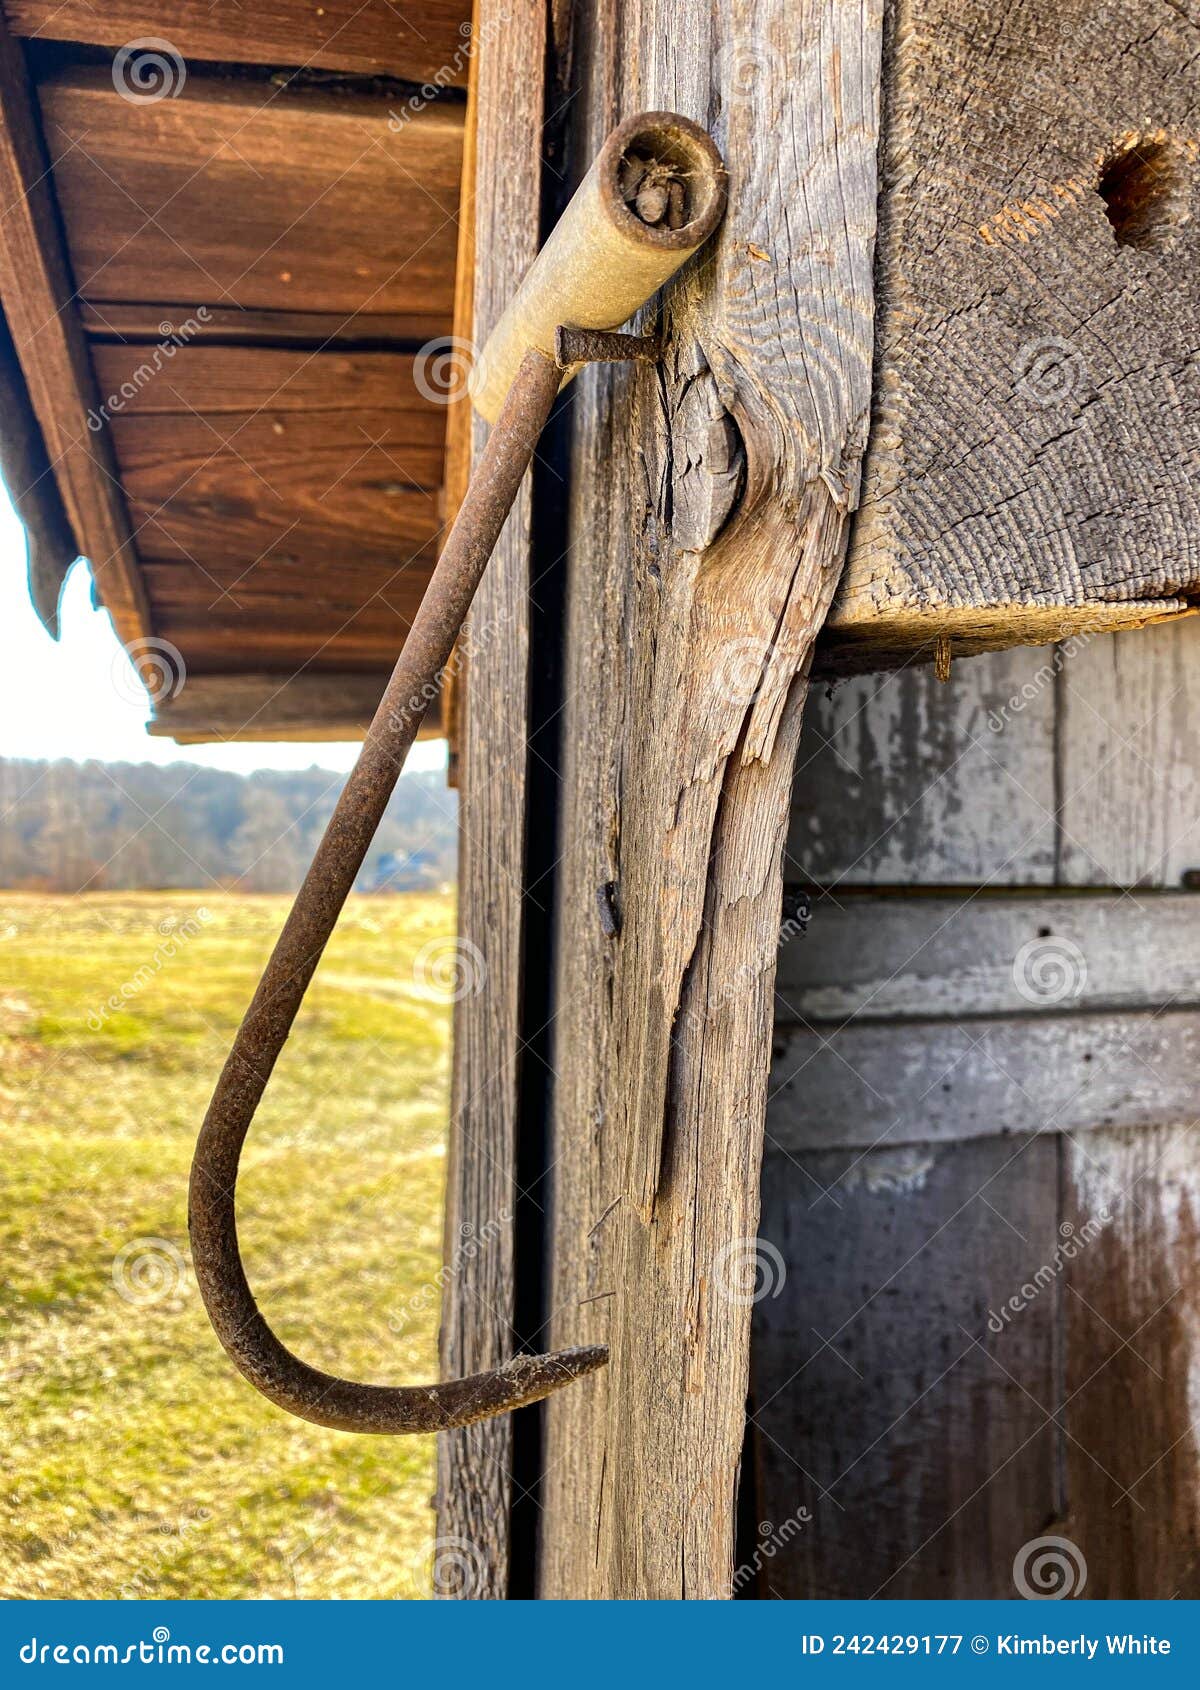 A Metal Hay Hook Hangs from Grandpa S Old Shed Stock Image - Image